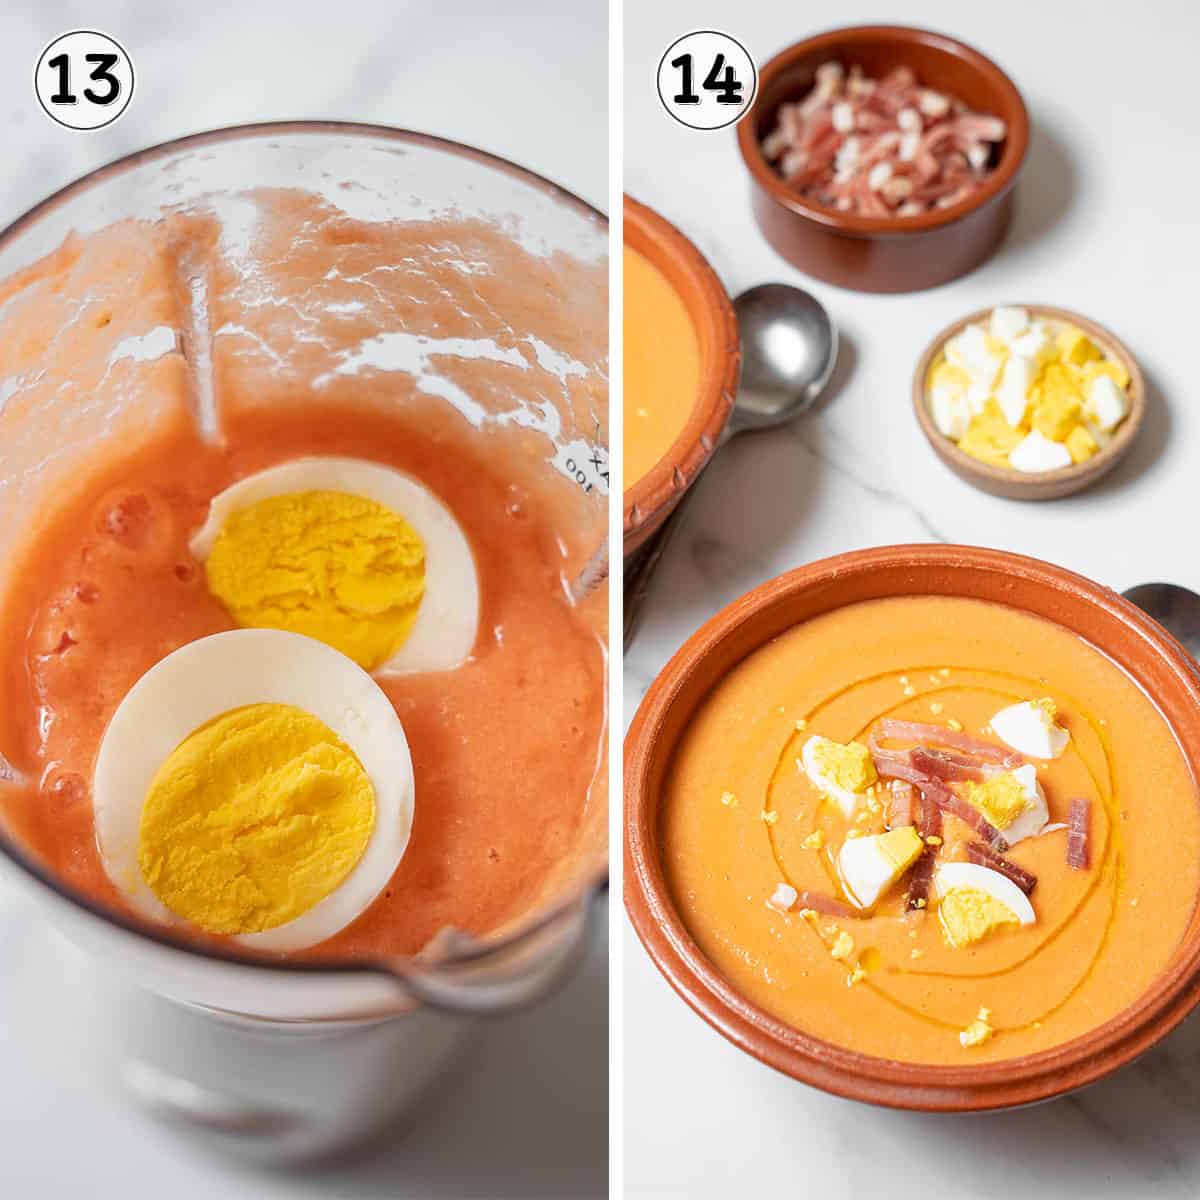 blending hard boiled egg into the salmorejo and serving in a bowl.